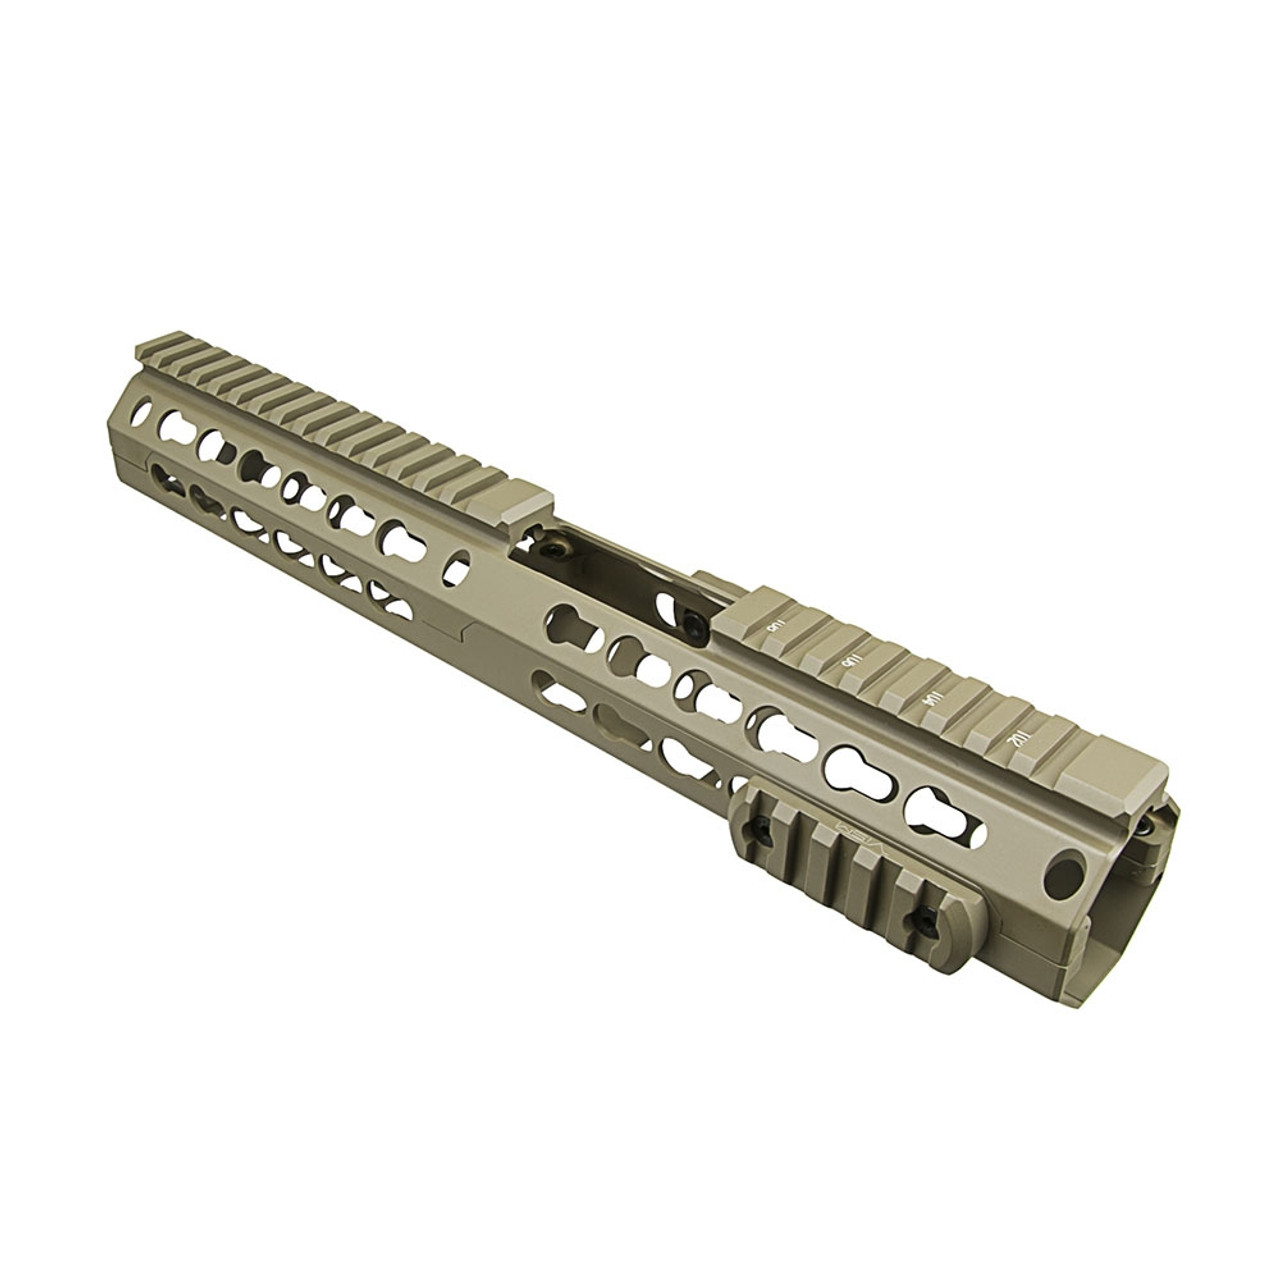 NcSTAR VMARKMCET 223/556  Keymod Handguard/ Two Piece/ Drop In Fit/  Extended Length/ 13.5"L Tan